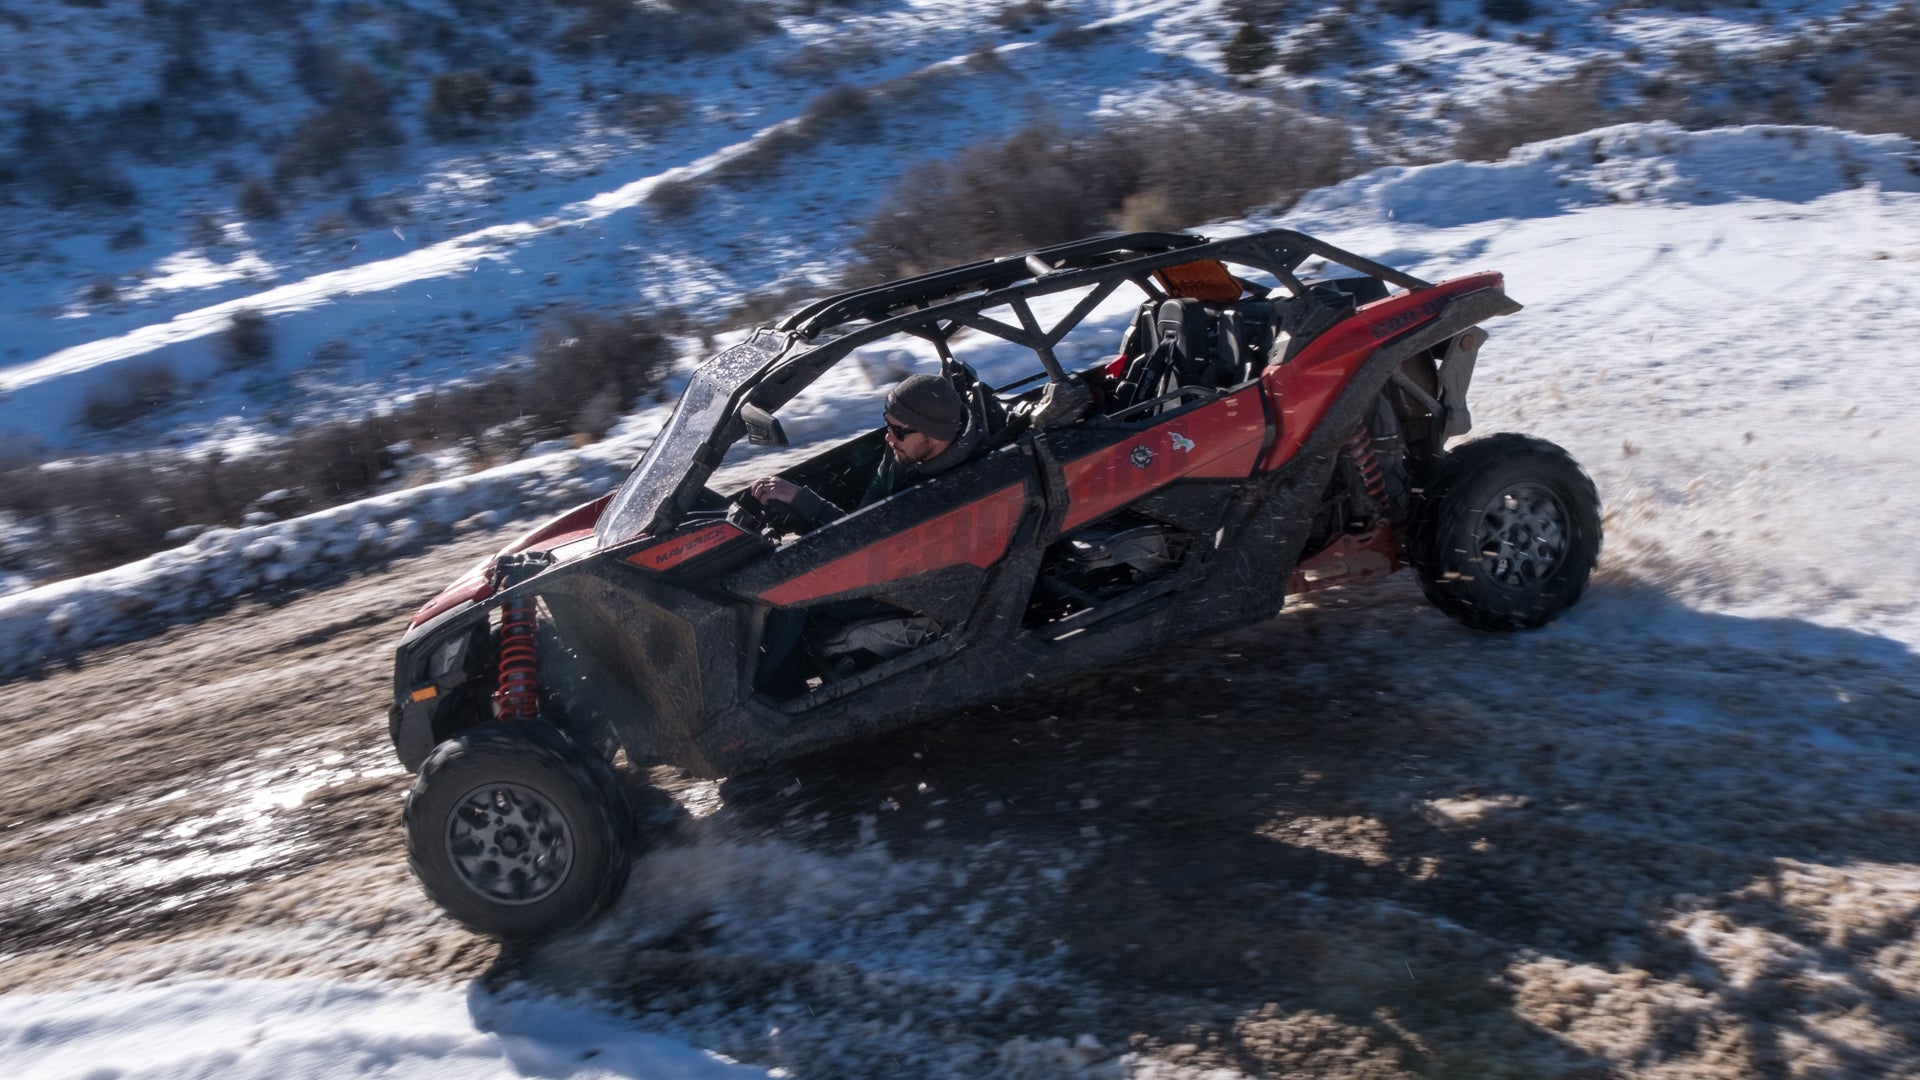 The Best Things I Bought This Year Are Fine, But Let’s Talk About My New Can-Am Maverick X3